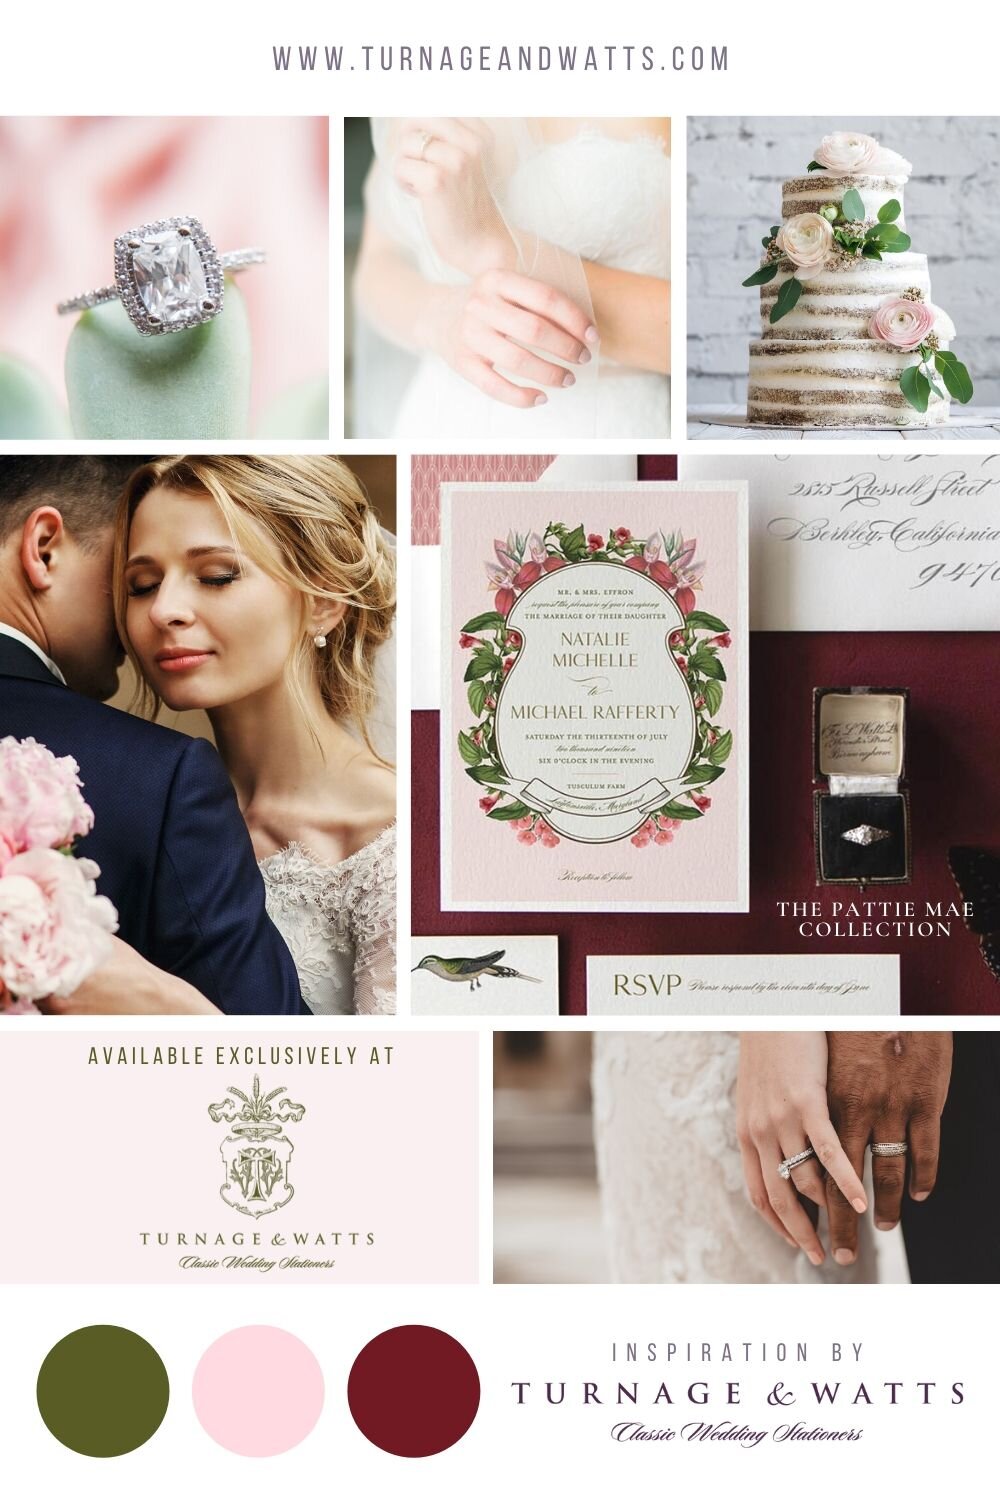 Young bride embracing groom with pink flowers. Pink and green wedding stationery color theme.